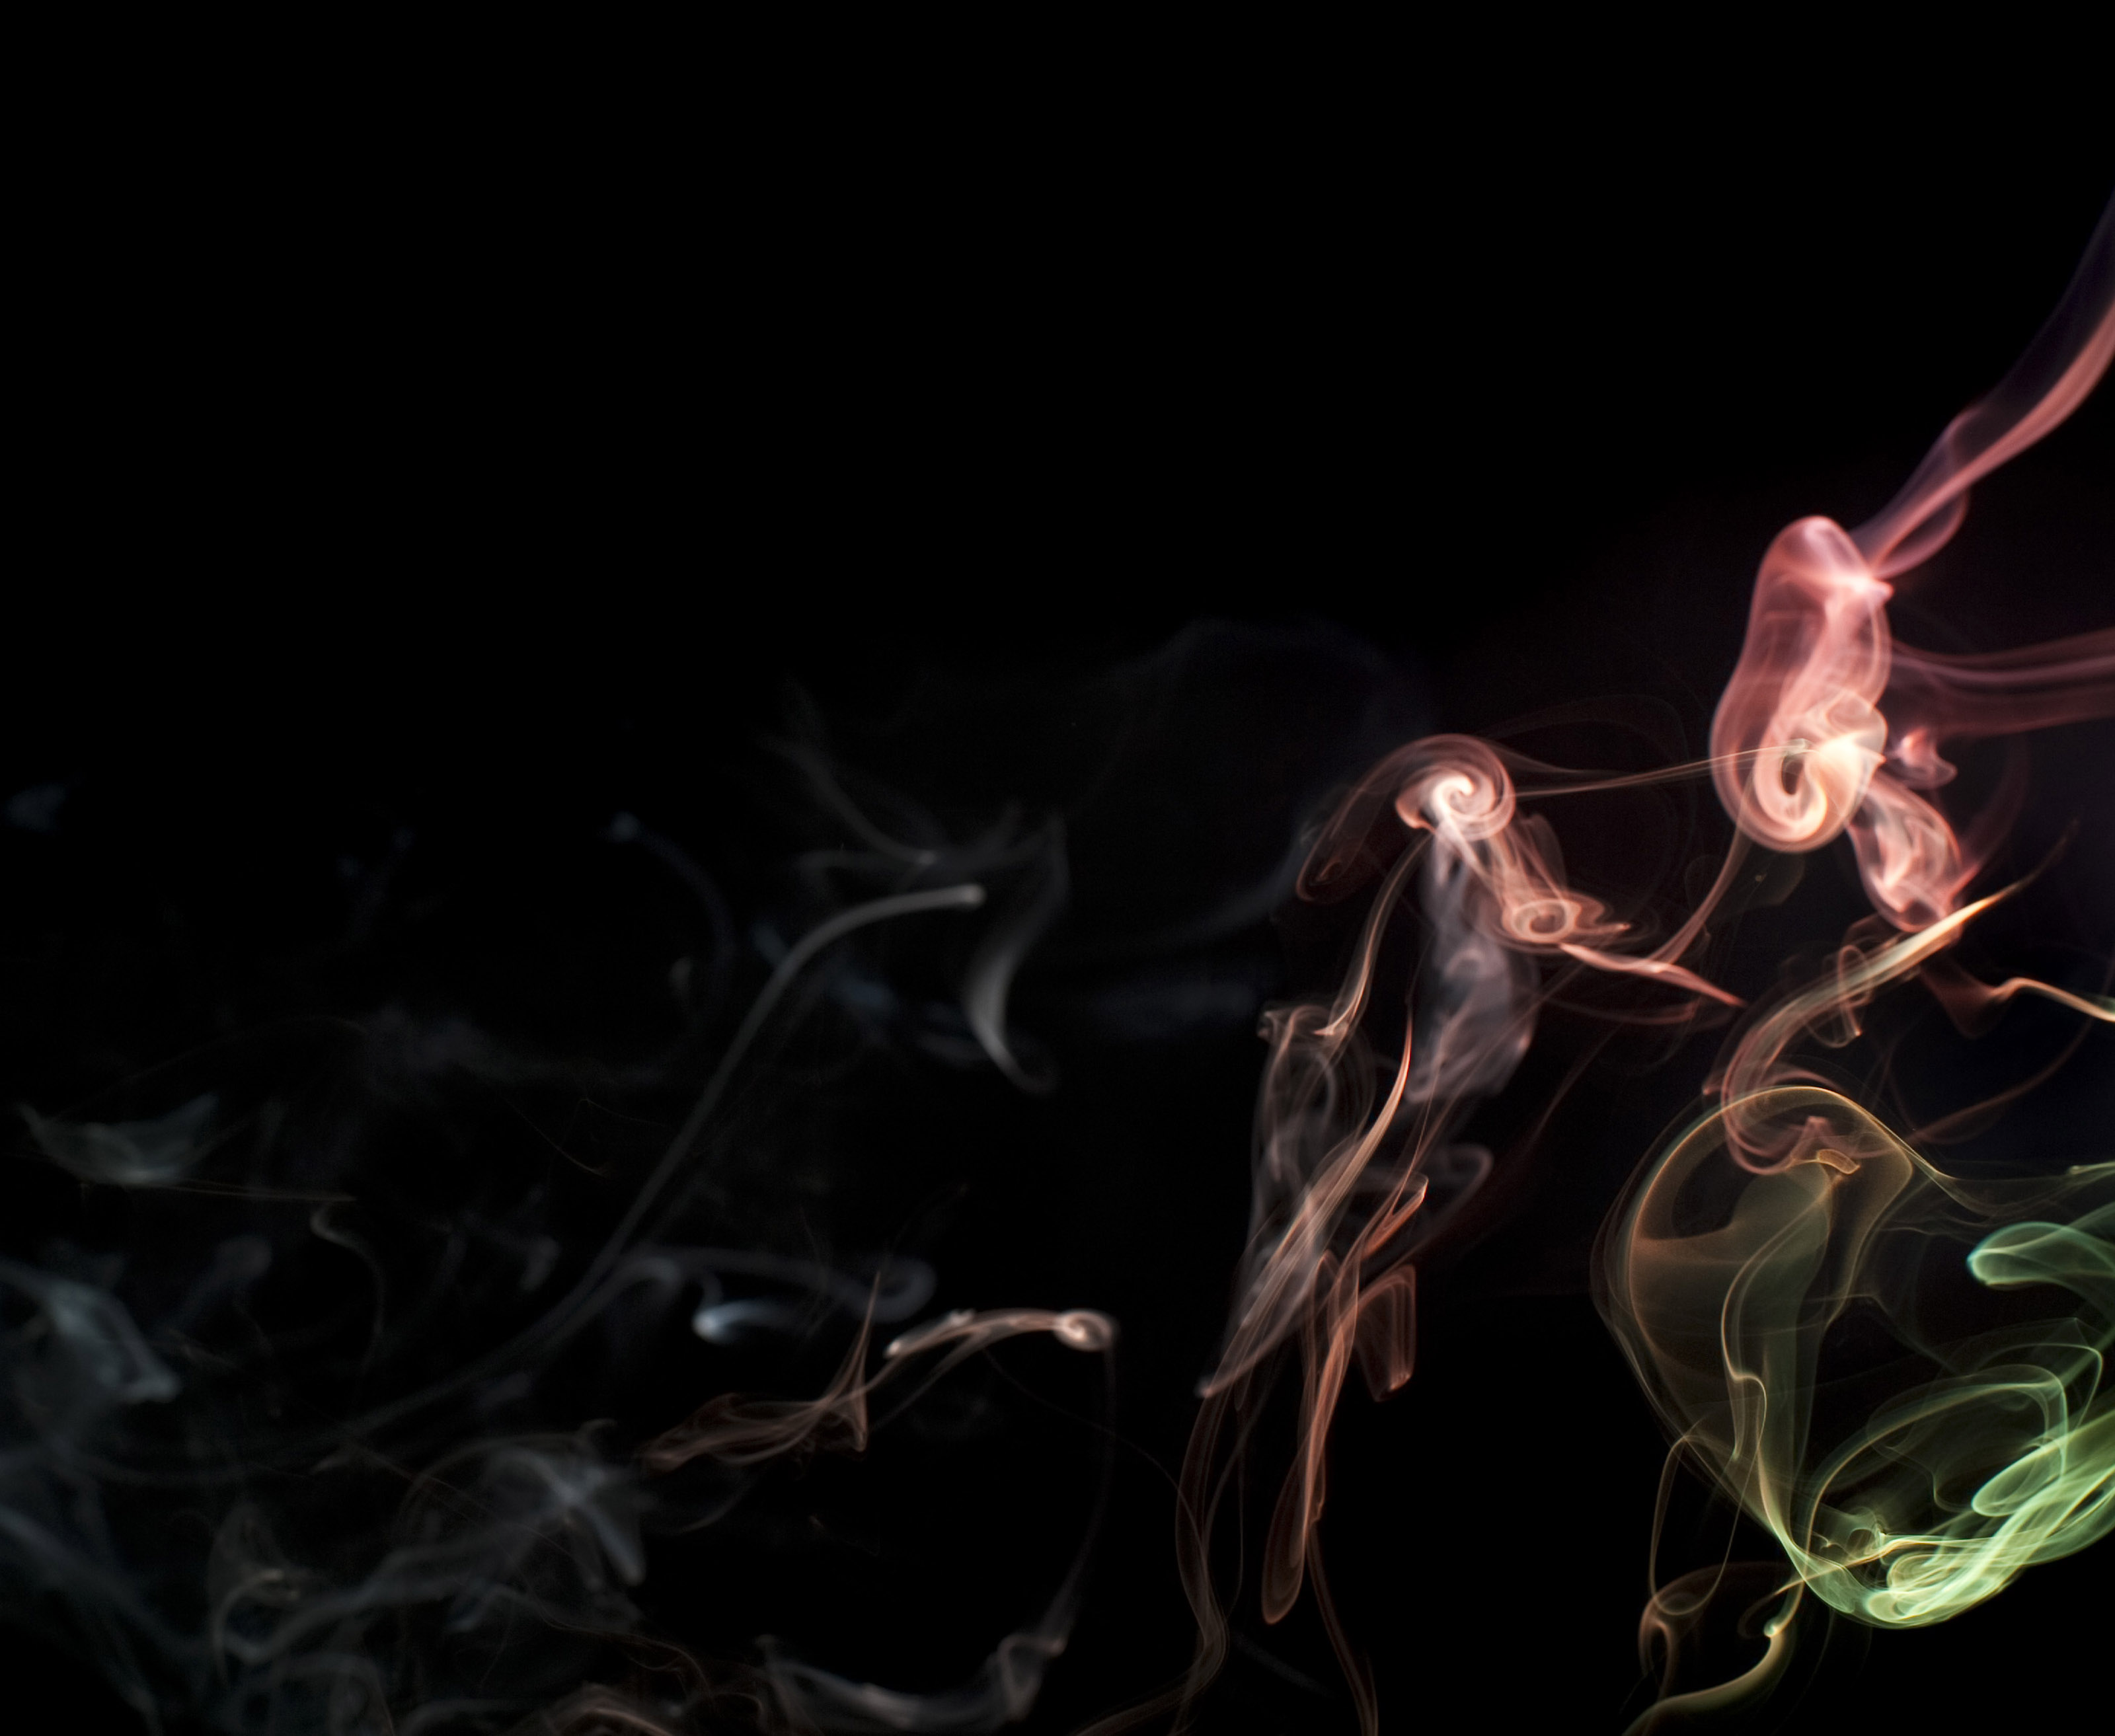 colored weed smoke black background